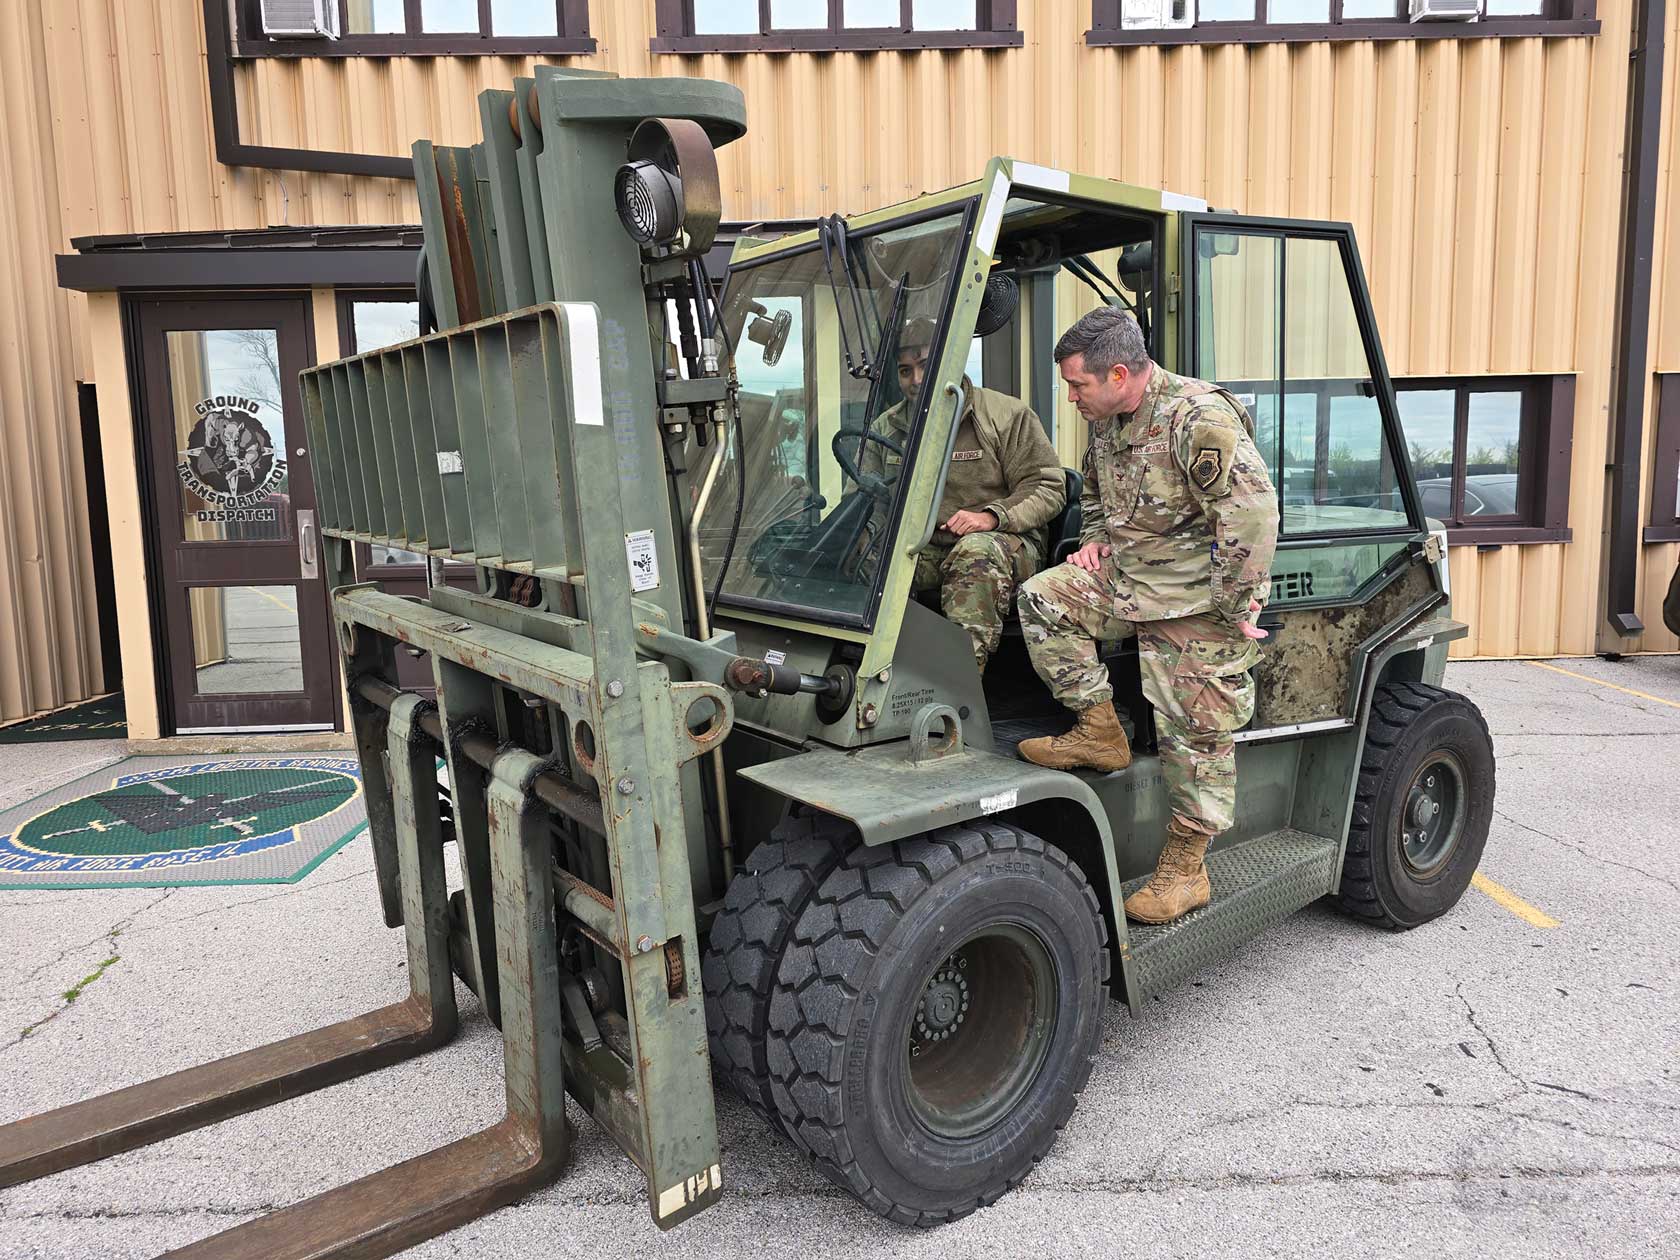 A man in uniform sitting on the back of a forklift.